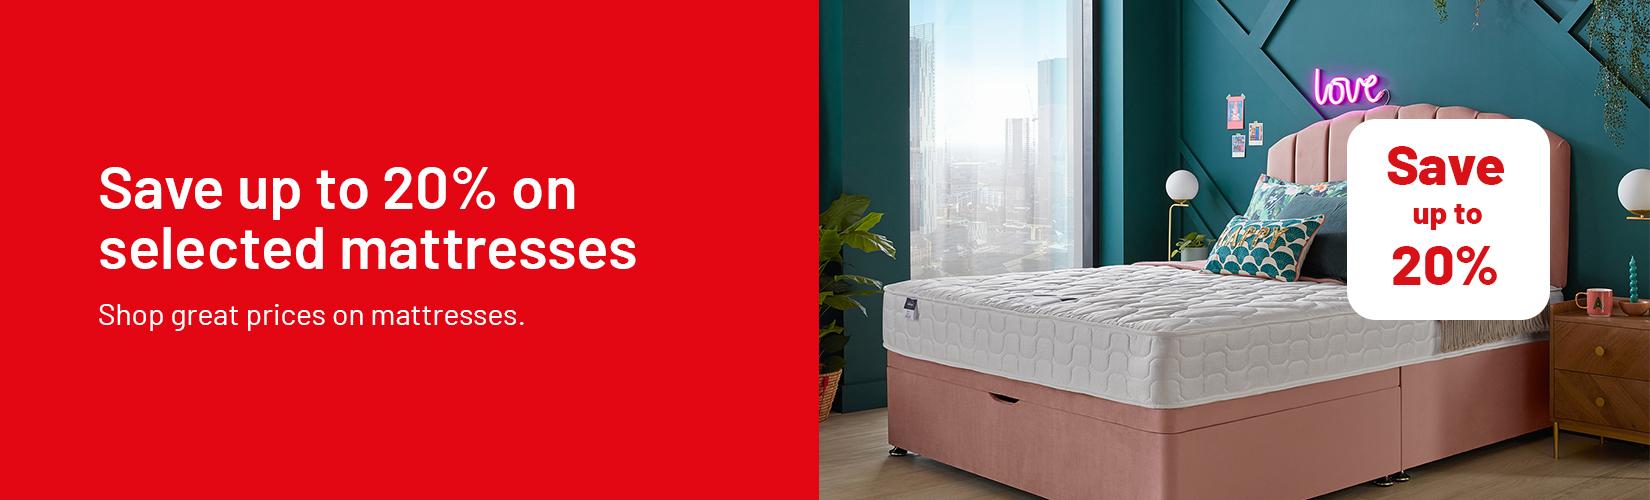 Save up to 20% on selected mattresses.